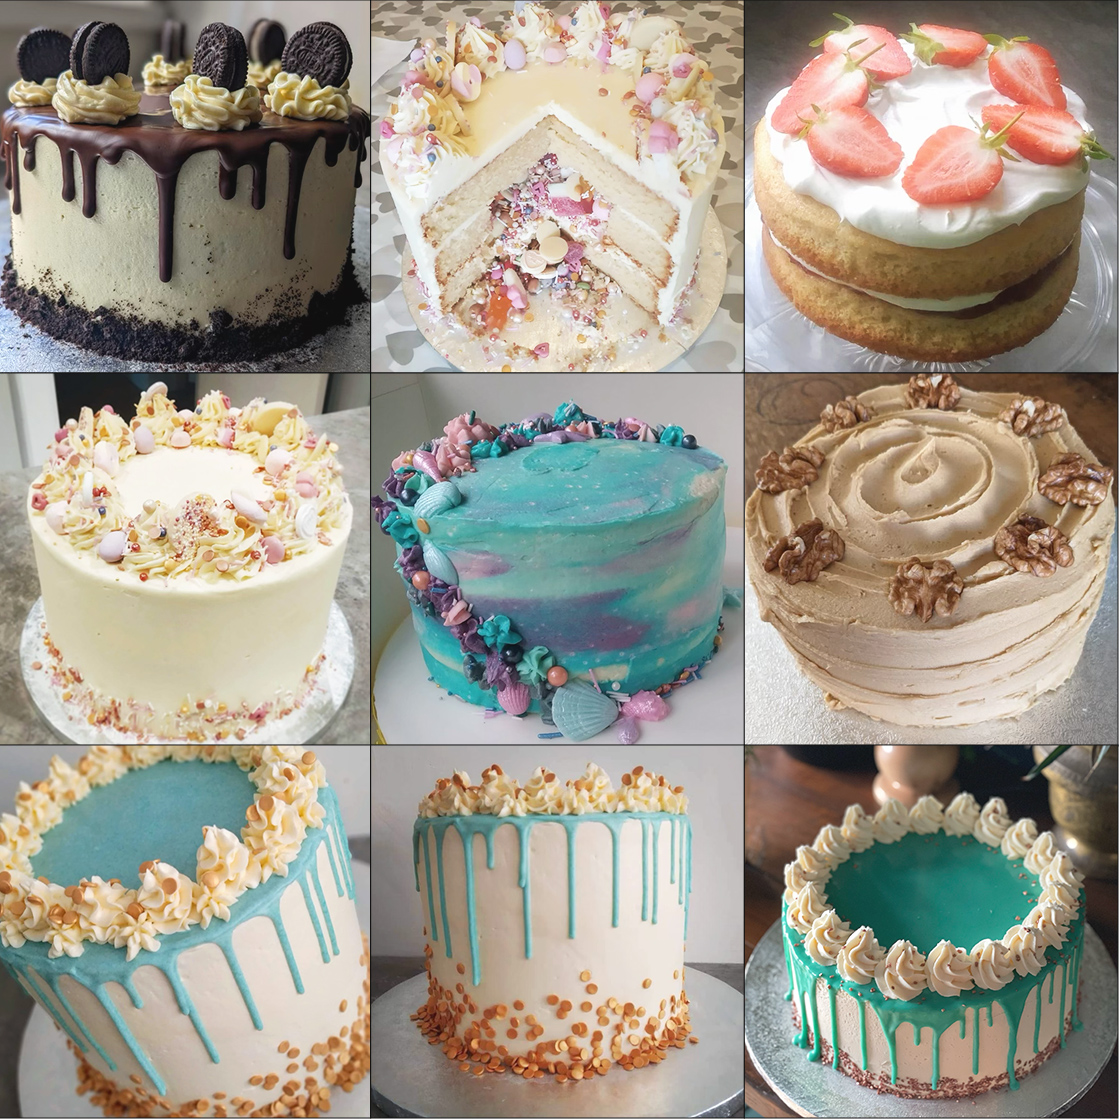 Handmade and custom gluten free cakes made to order by Against the Grain - in Cardiff.